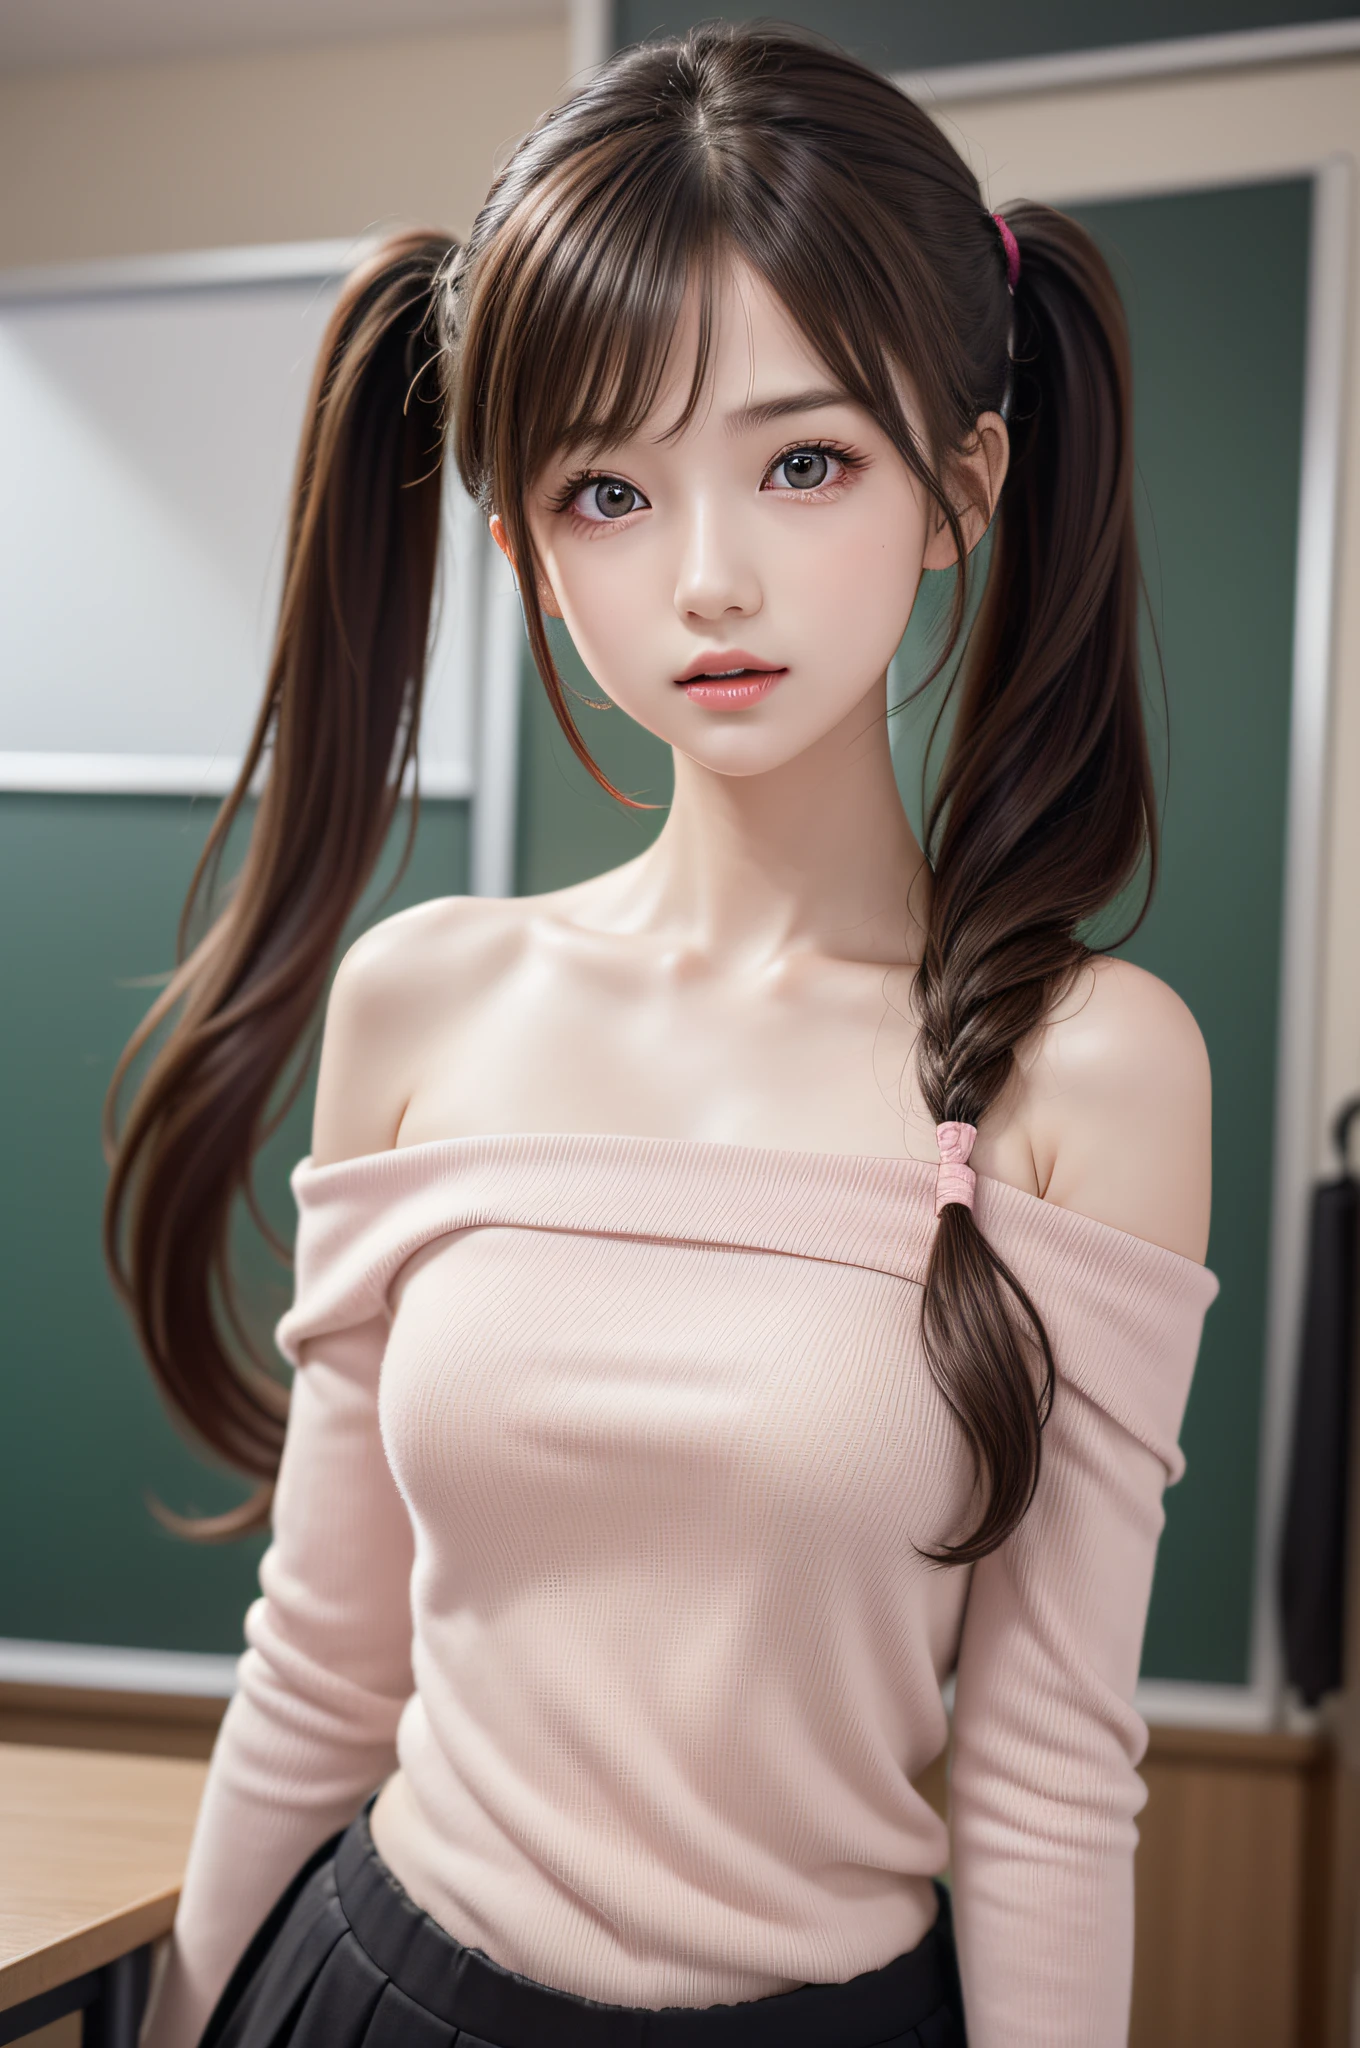 ((1girl in)), ((Best Quality)), (Ultra-detailed), (extremely detailed CG unified 8k wallpaper), Highly detailed, High-definition raw color photos, Professional Photography, (Twintails), Brown hair, Amazing face and eyes, Pink eyes, (amazingly beautiful girl), School, classroom, off shoulder,